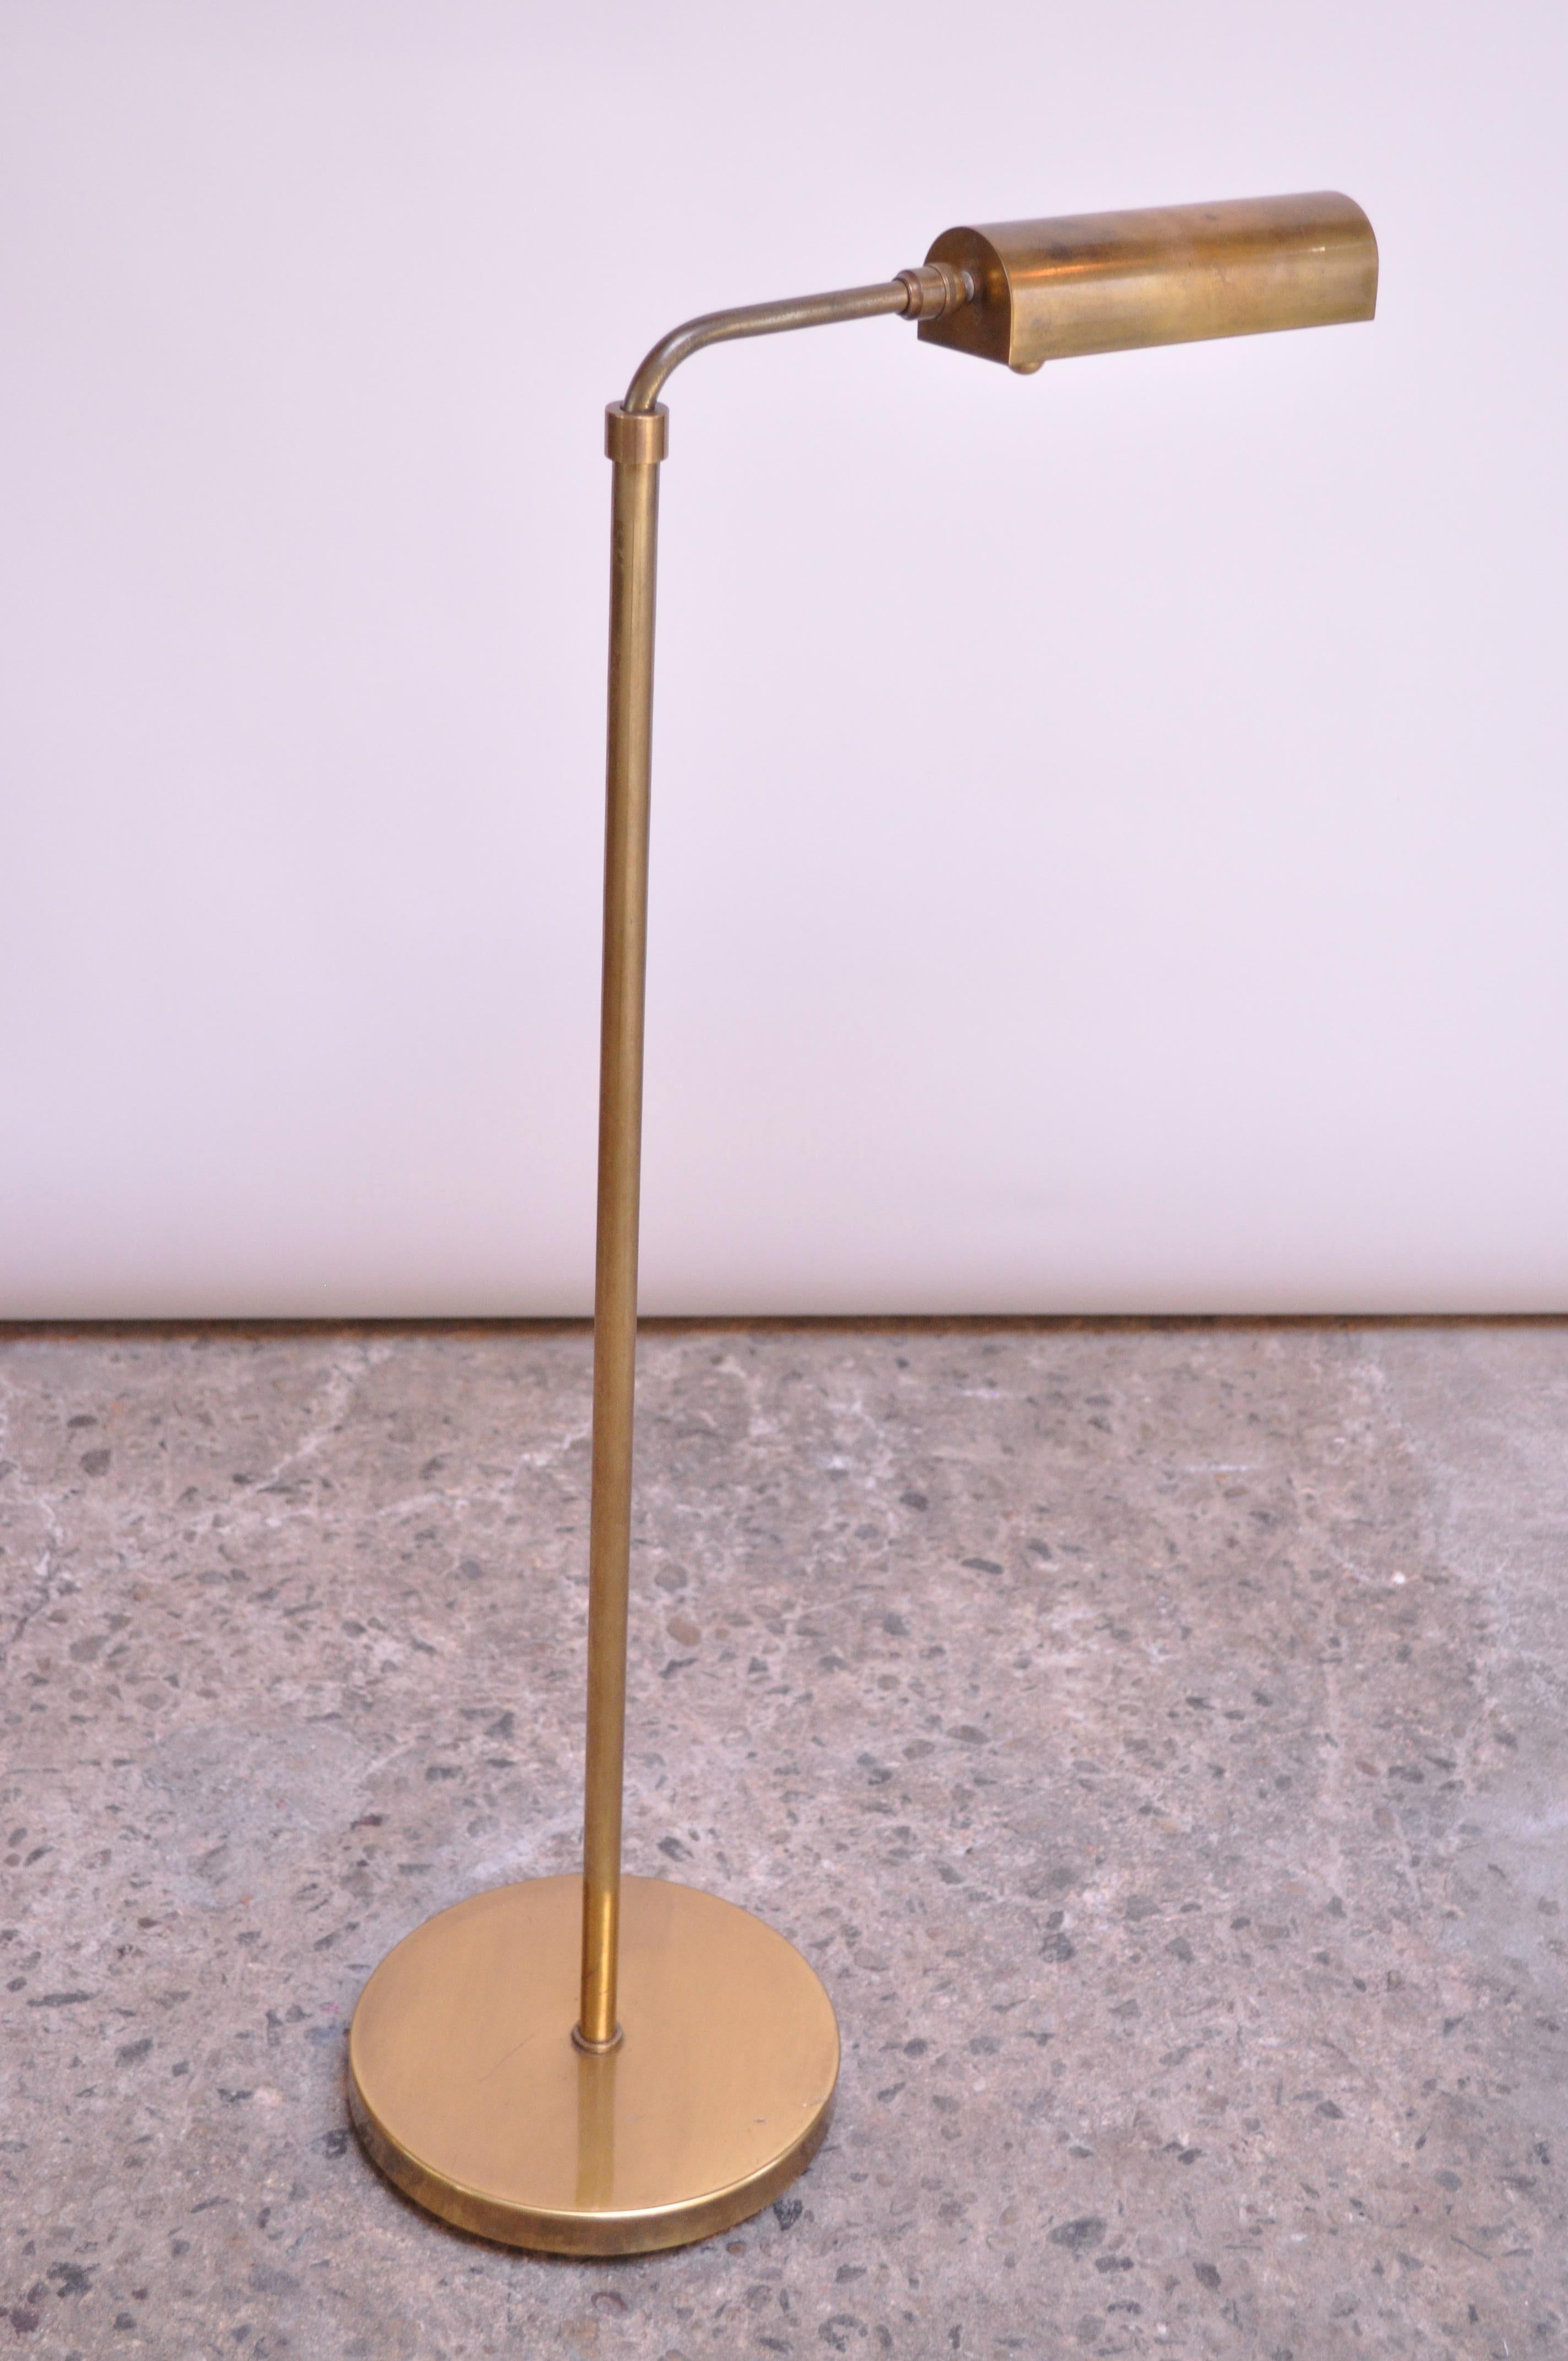 This floor lamp was designed by Chapman in the 1970s combining Industrial and modern design. Comprised entirely of brass this piece also features the signature bronze finish and dimmer 'ball' knob. The shade is fully adjustable, offering full 360